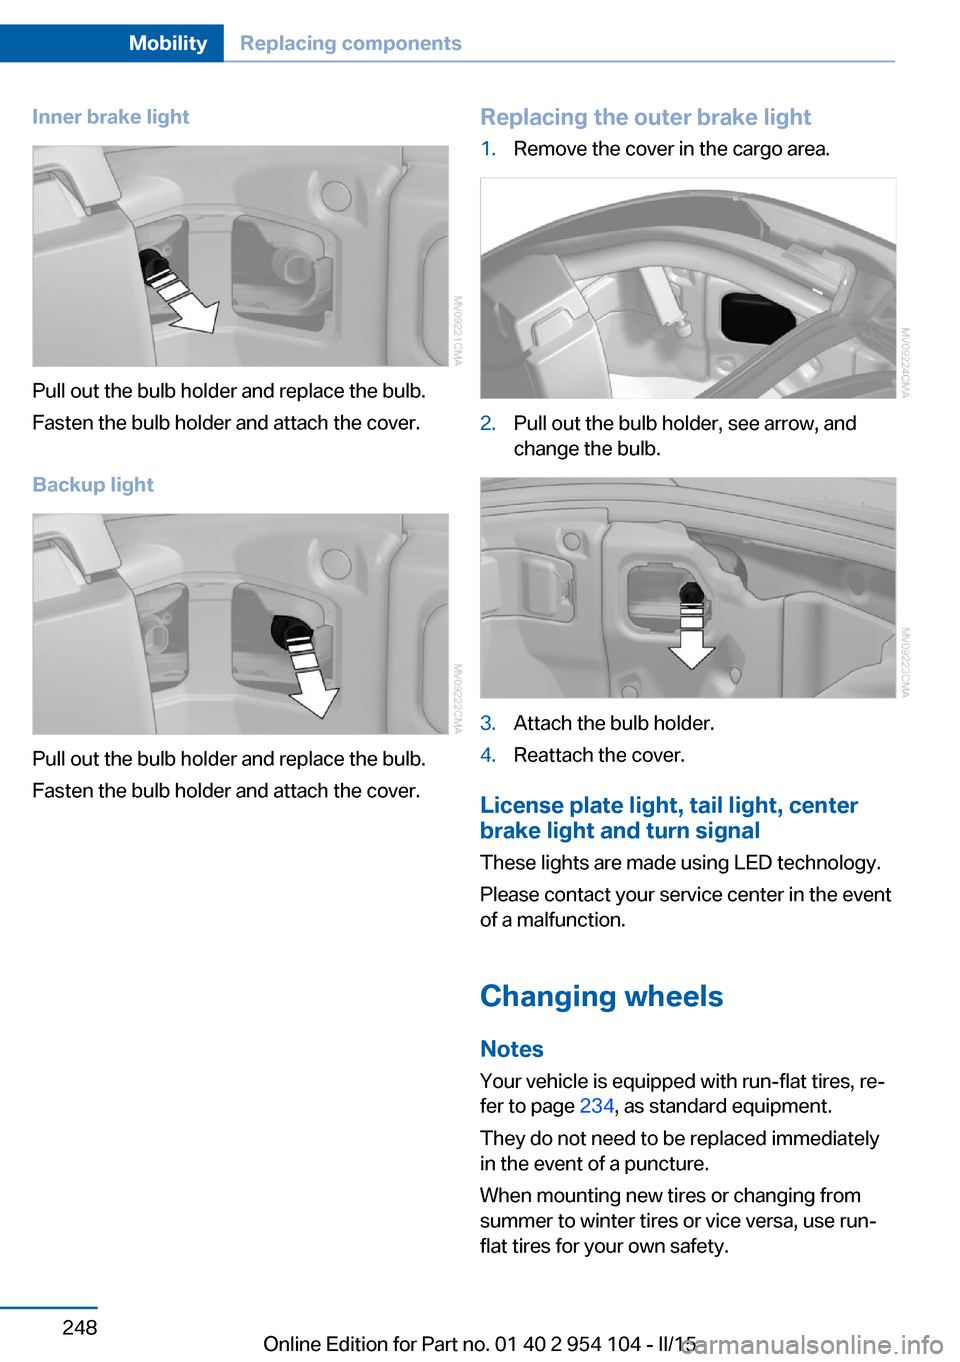 BMW Z4 2015 E89 Owners Manual Inner brake light
Pull out the bulb holder and replace the bulb.
Fasten the bulb holder and attach the cover.
Backup light
Pull out the bulb holder and replace the bulb.
Fasten the bulb holder and att